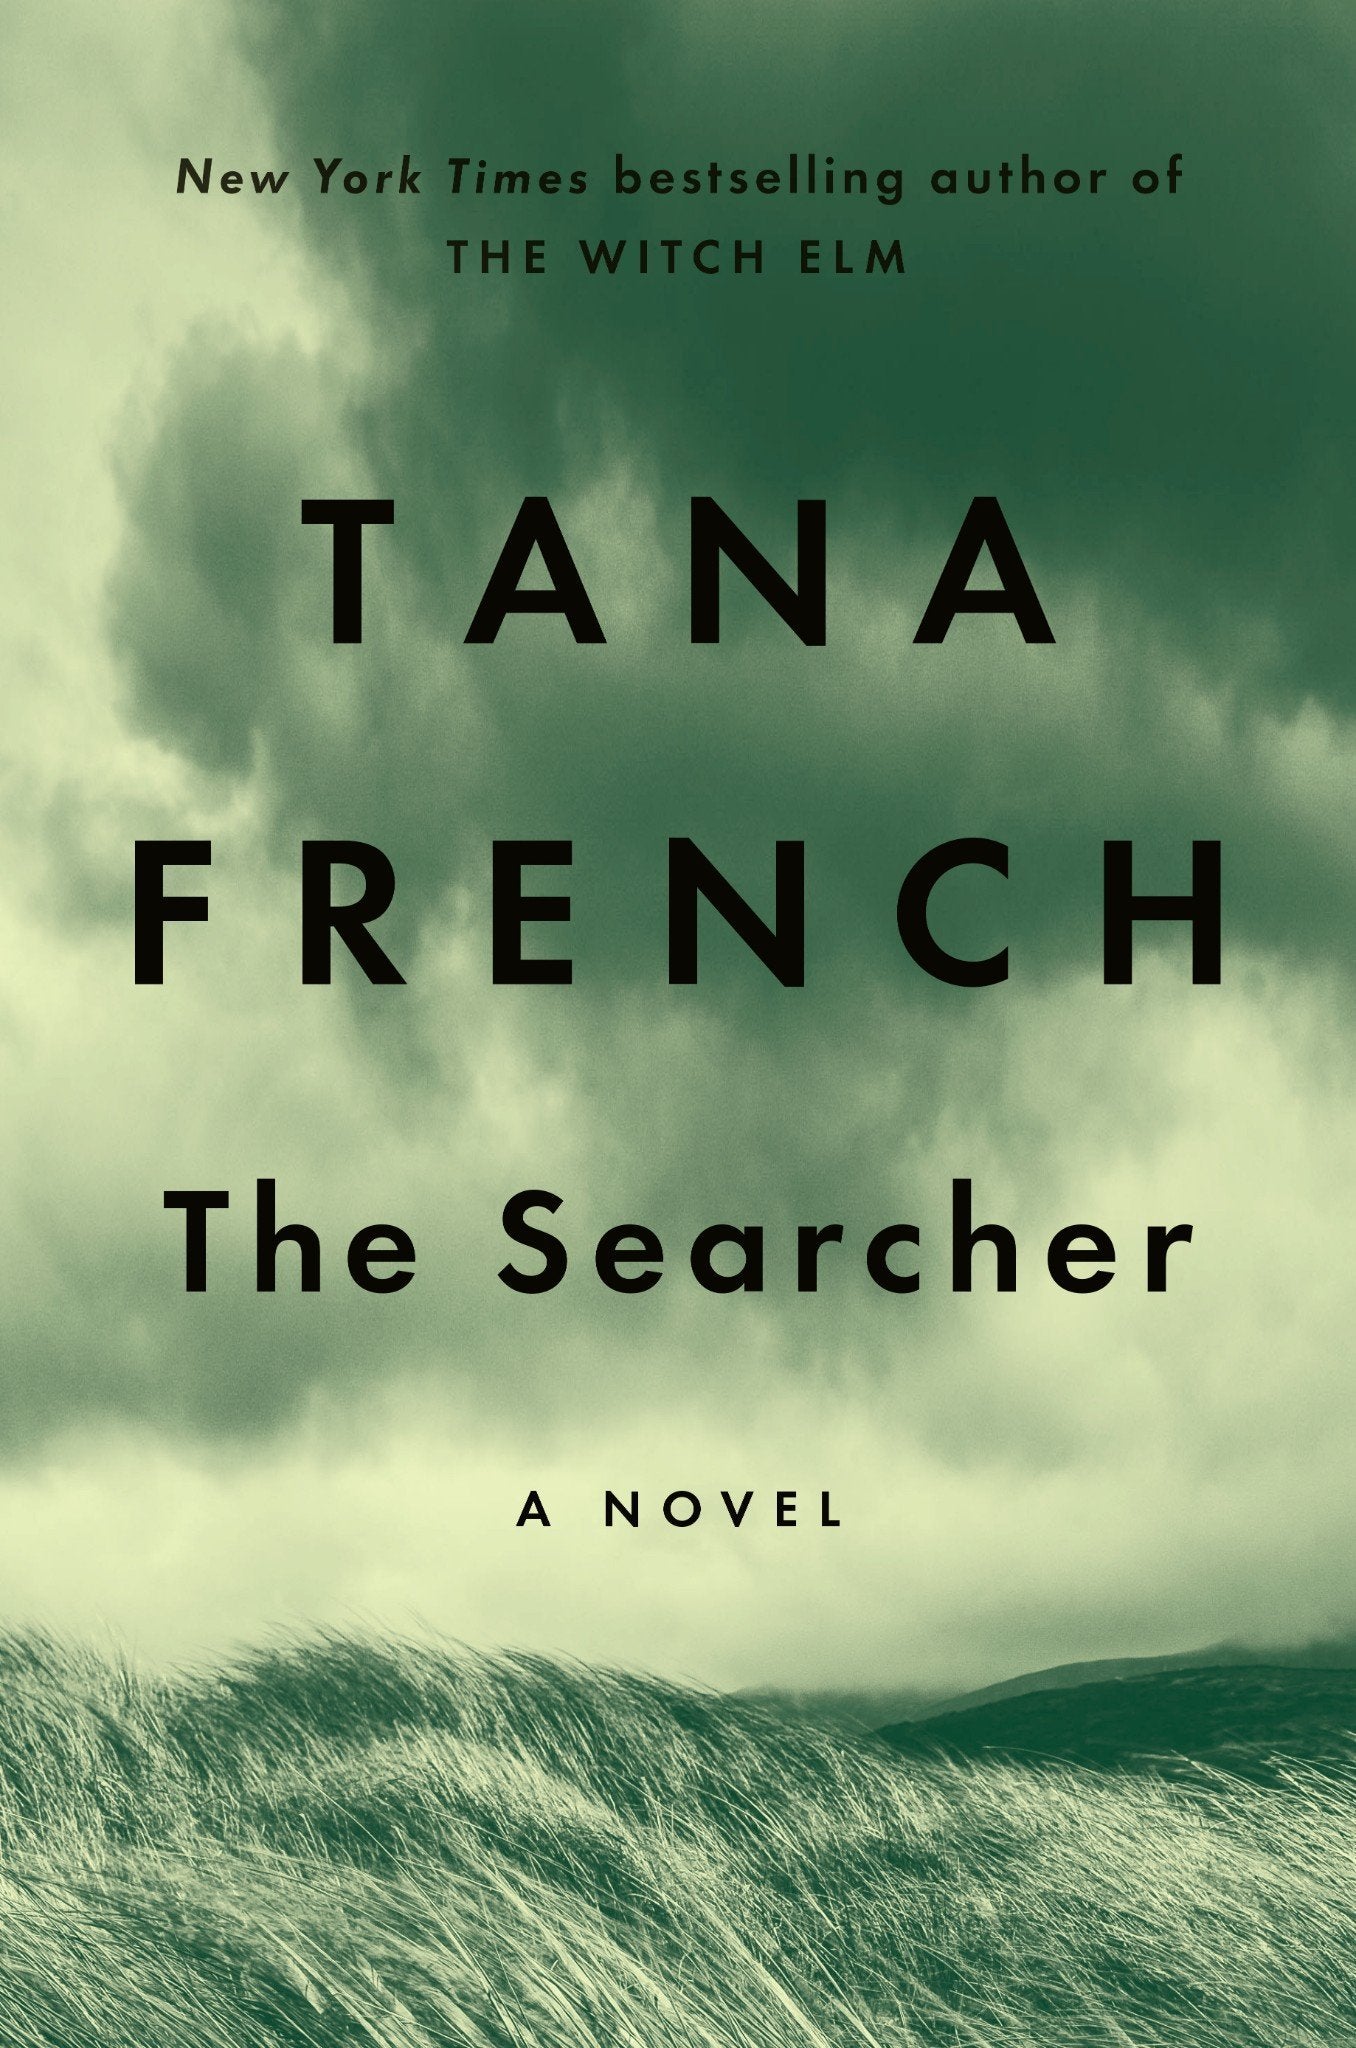 The Searcher by Tana French (Hardcover) 